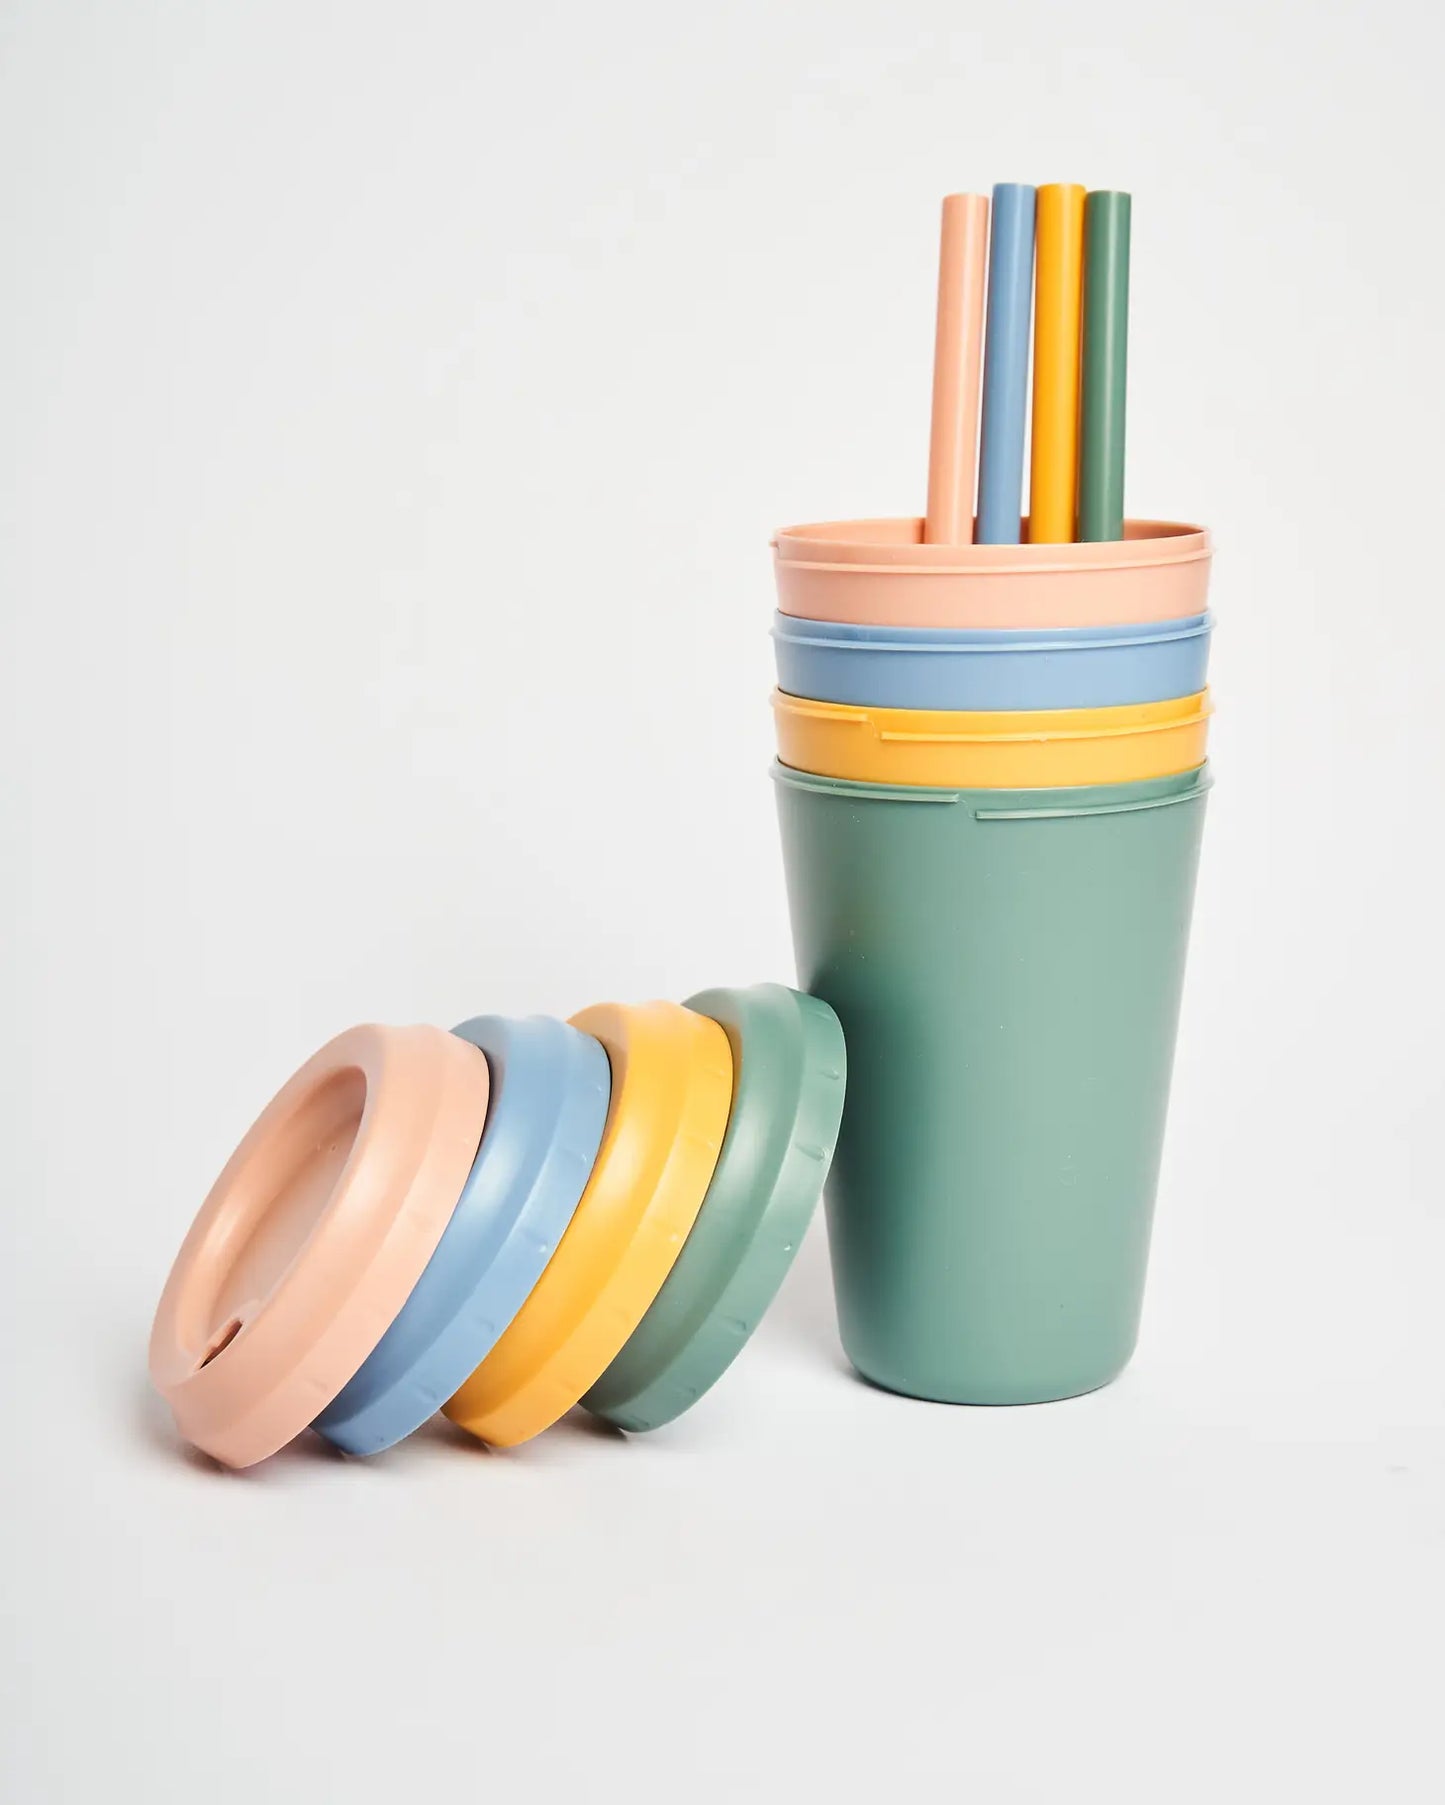 Eco-friendly and colourful set for convenient and fun on-the-go hydration.